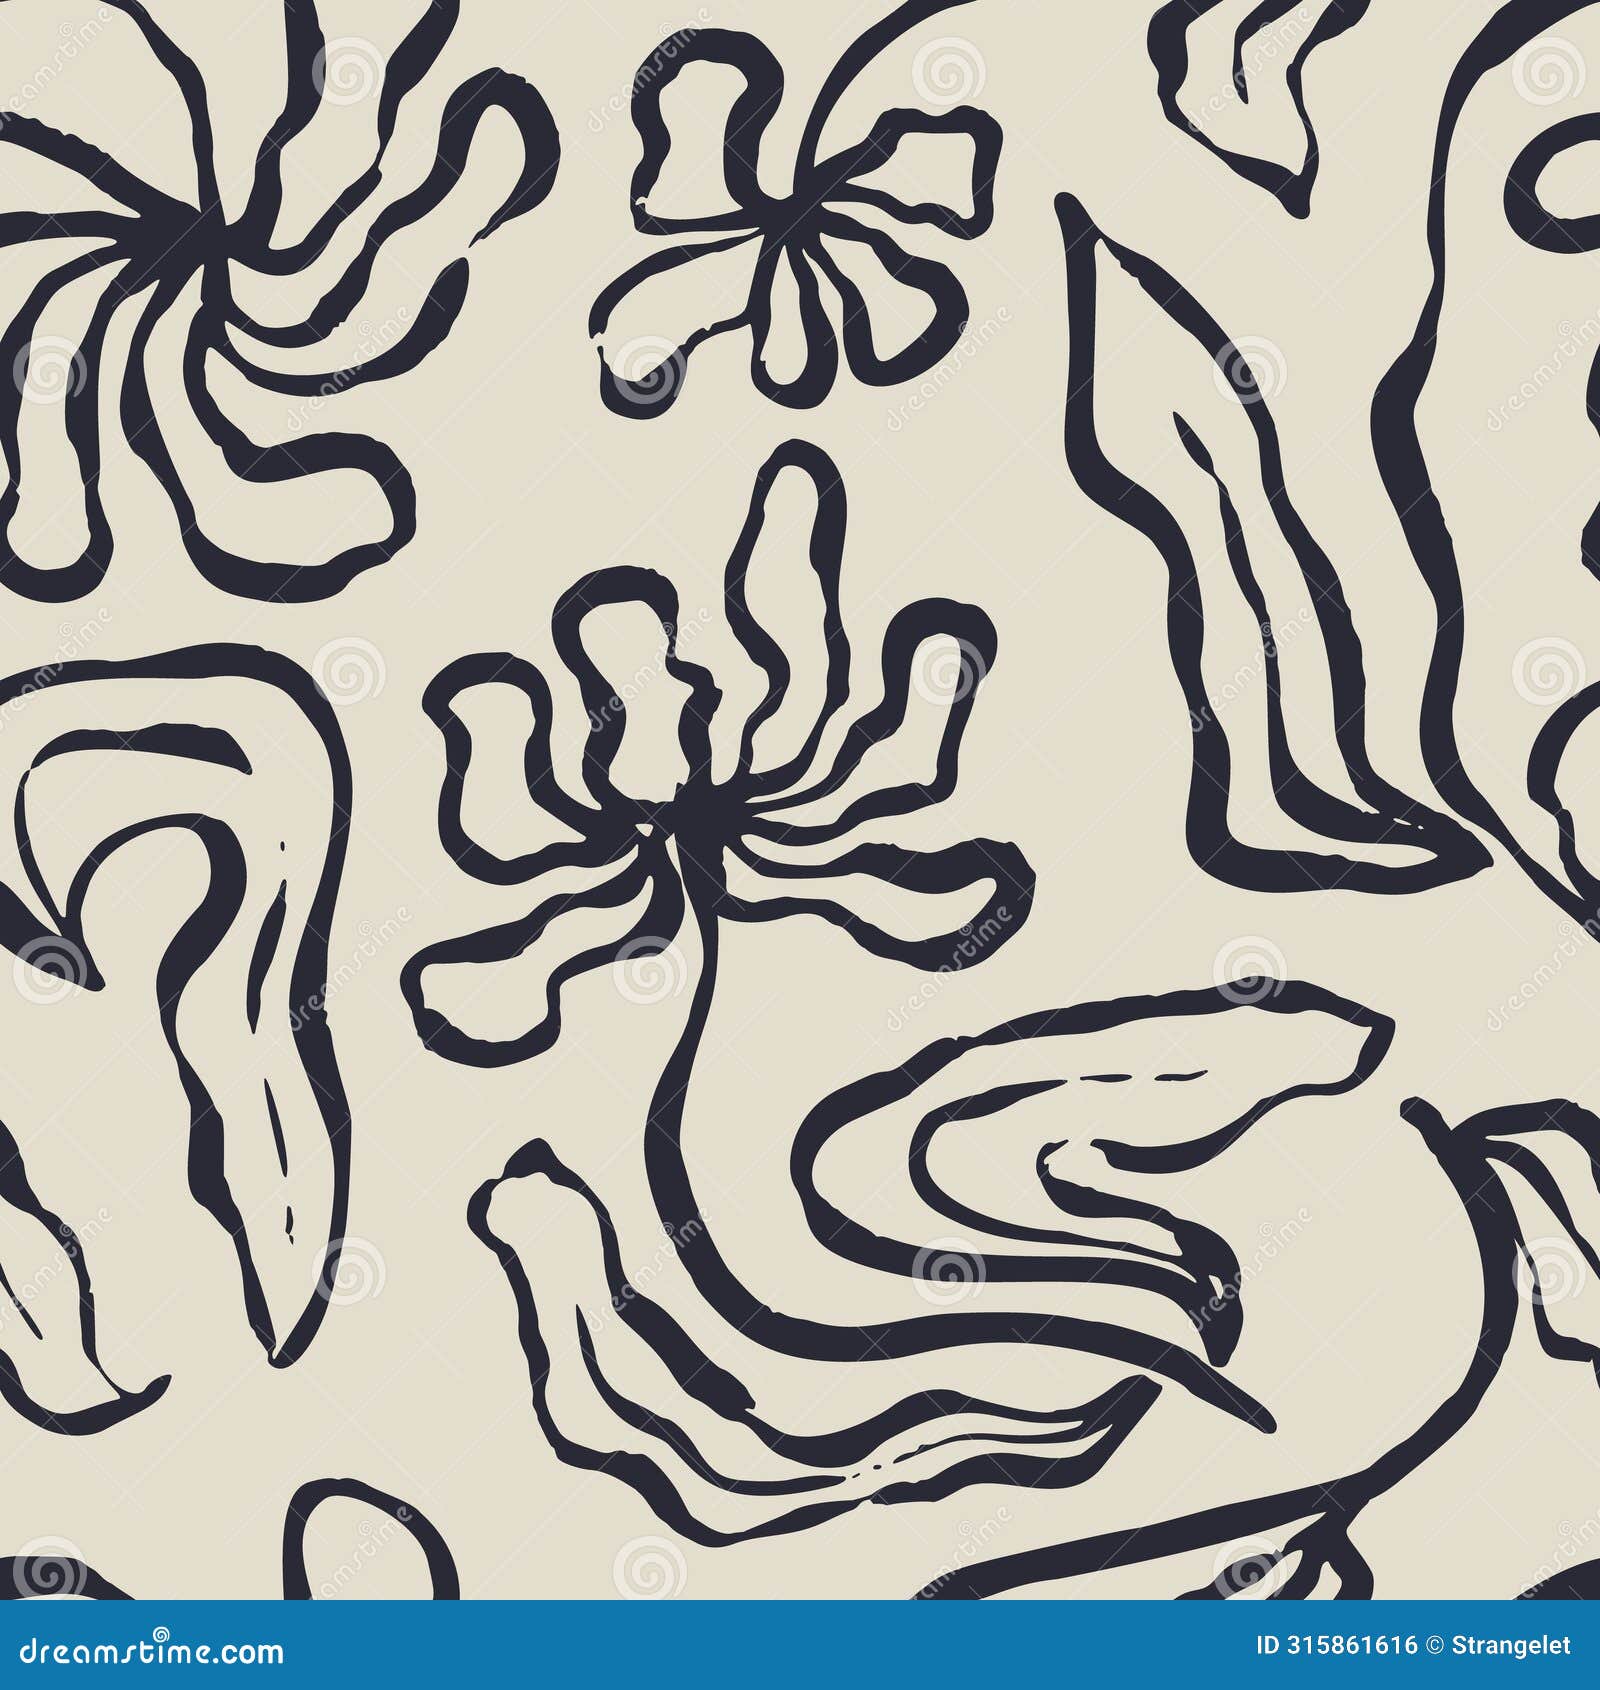 monochrome black and white brush strokes inky flowers seamless pattern